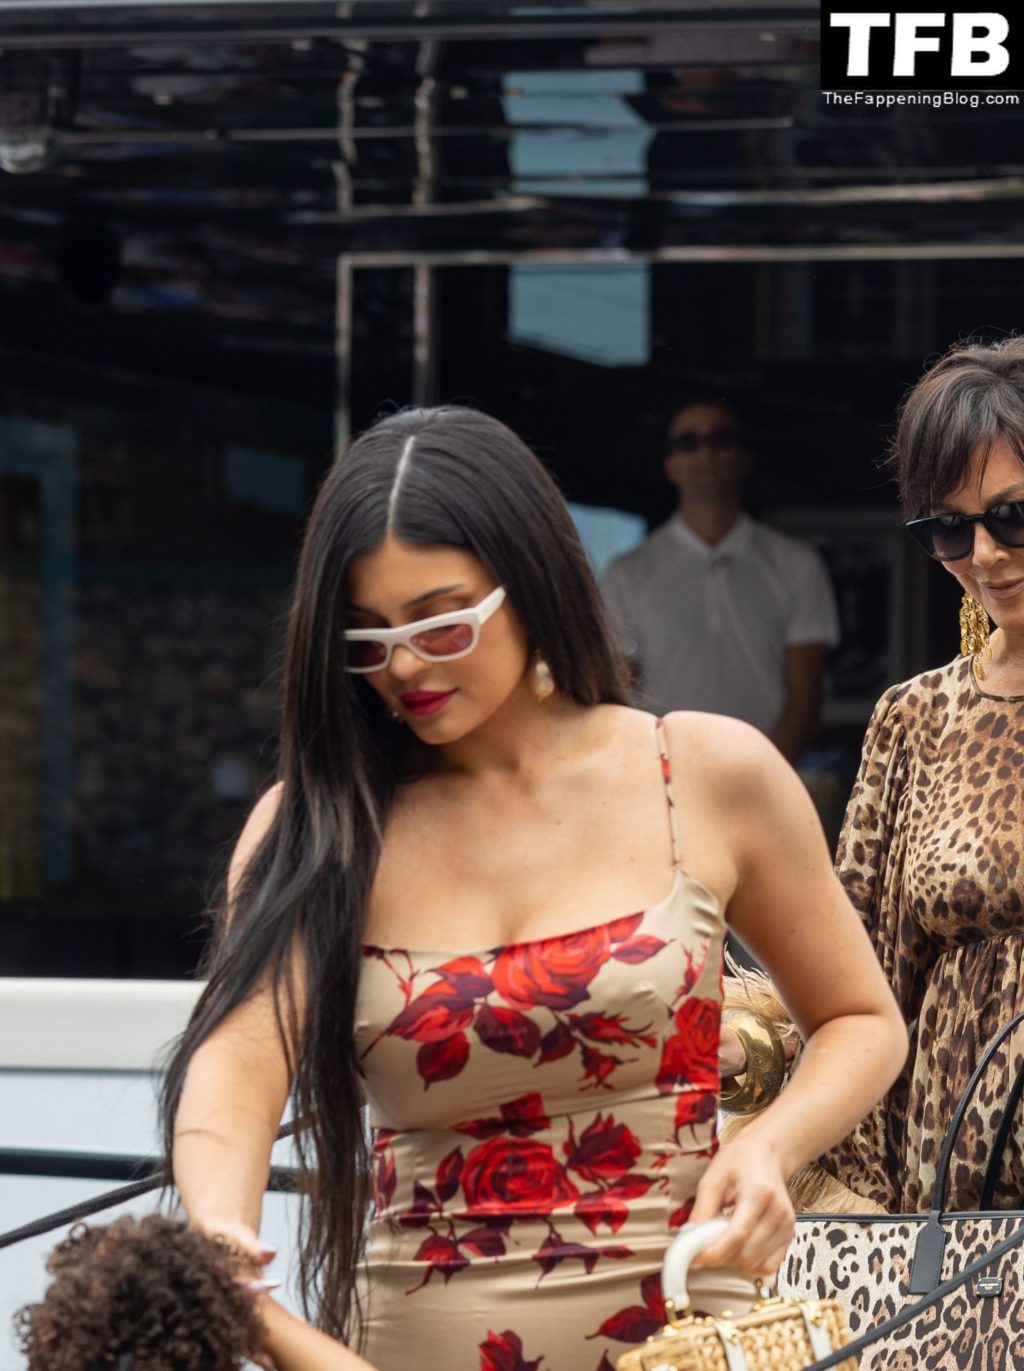 Kylie Jenner Sexy The Fappening Blog 32 1024x1371 - Kylie Jenner Flaunts Her Curves in Portofino (32 Photos)